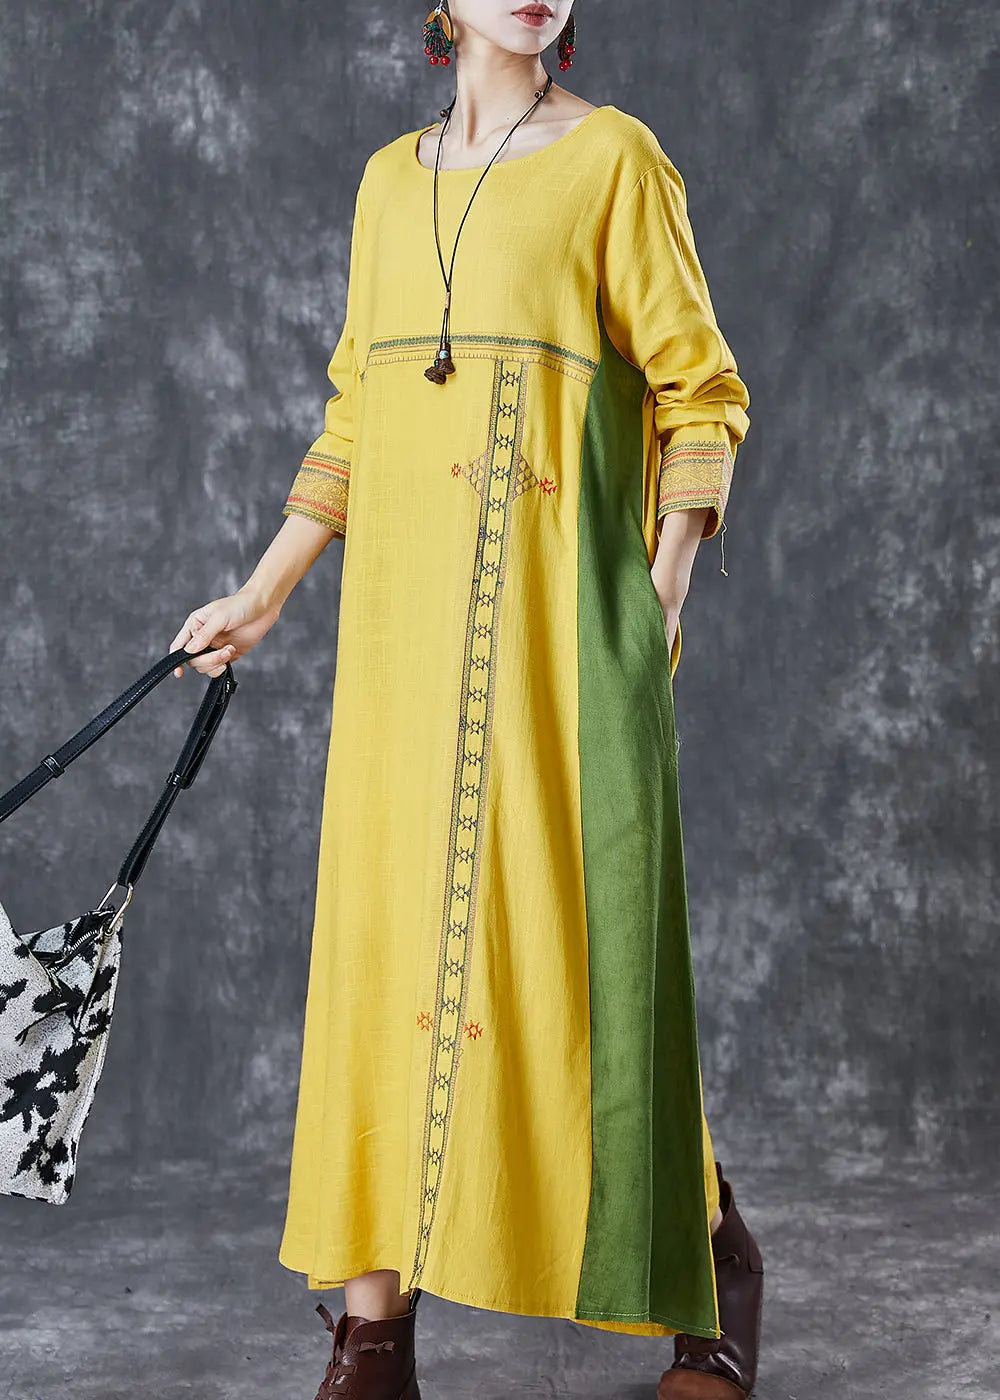 Modern Yellow Embroidered Patchwork Linen Maxi Dresses Spring Ada Fashion